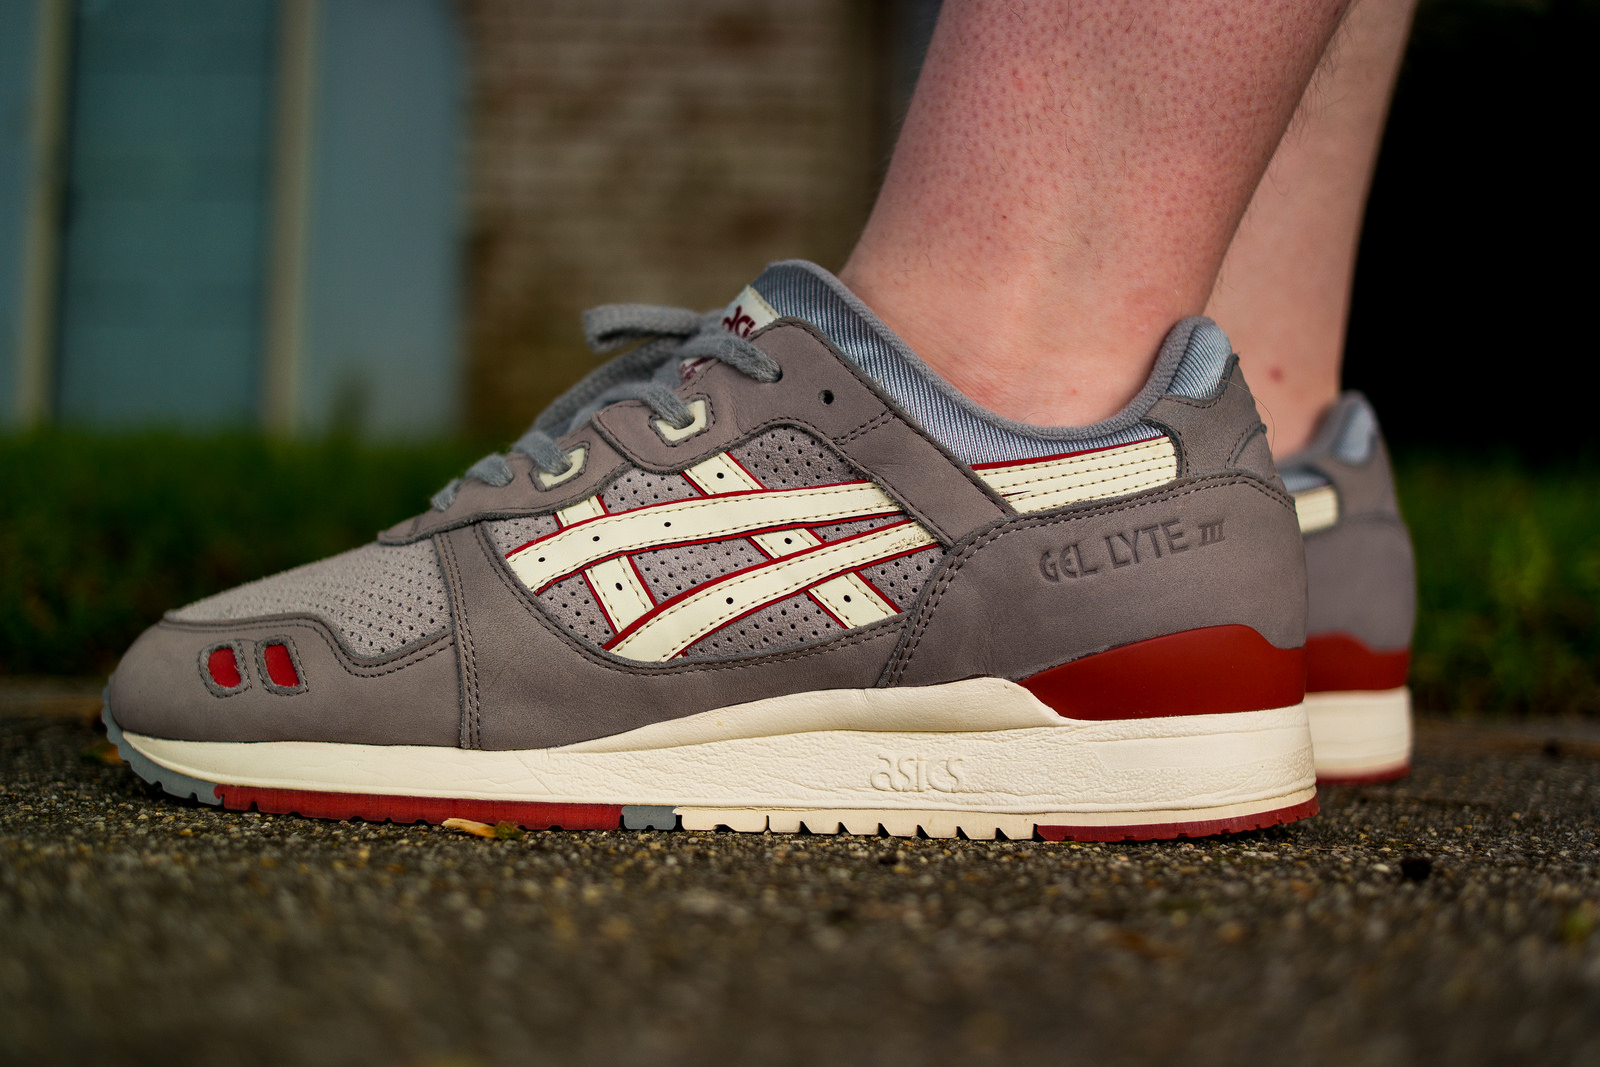 Highs and Lows x ASICS Gel Lyte III